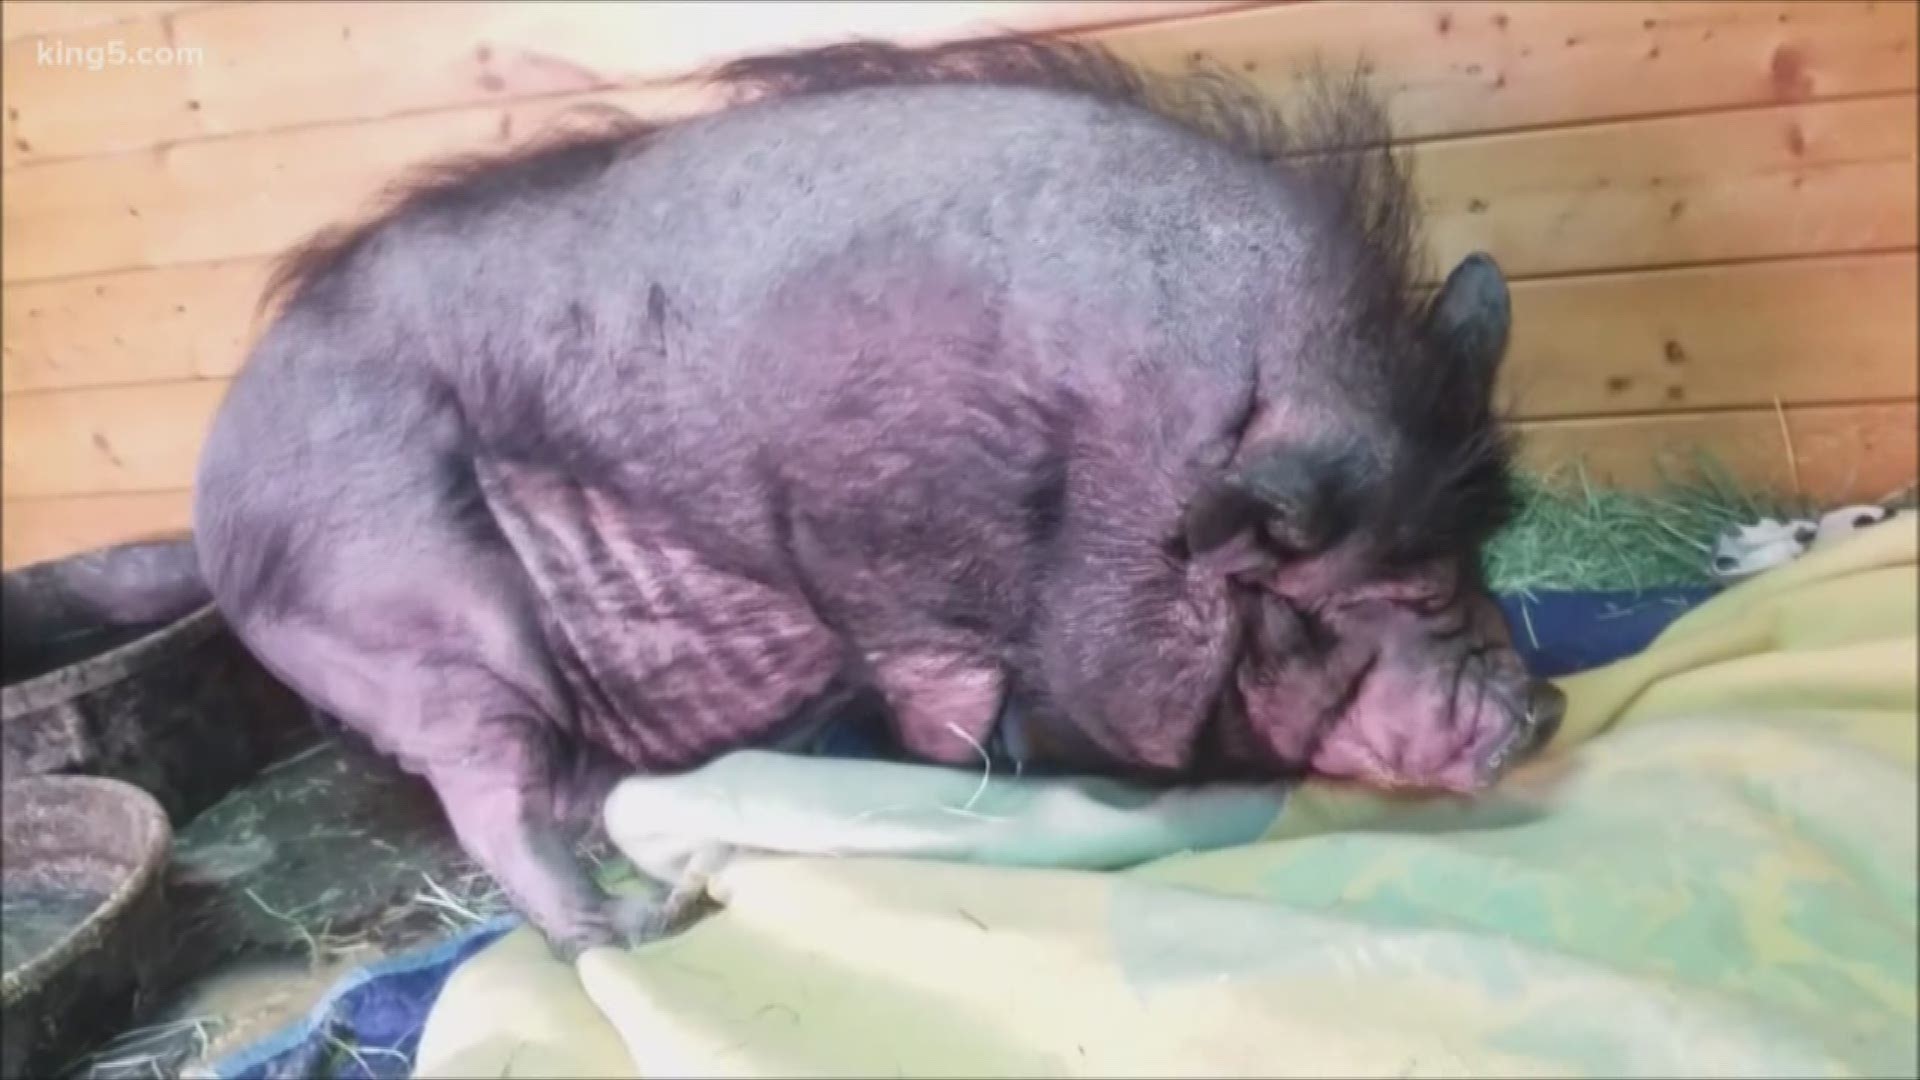 Bernard is a potbellied pig whose belly has gotten a bit too porky. Now Pasado's Safe Haven is nursing him back to health. KING 5's Eric Wilkinson reports